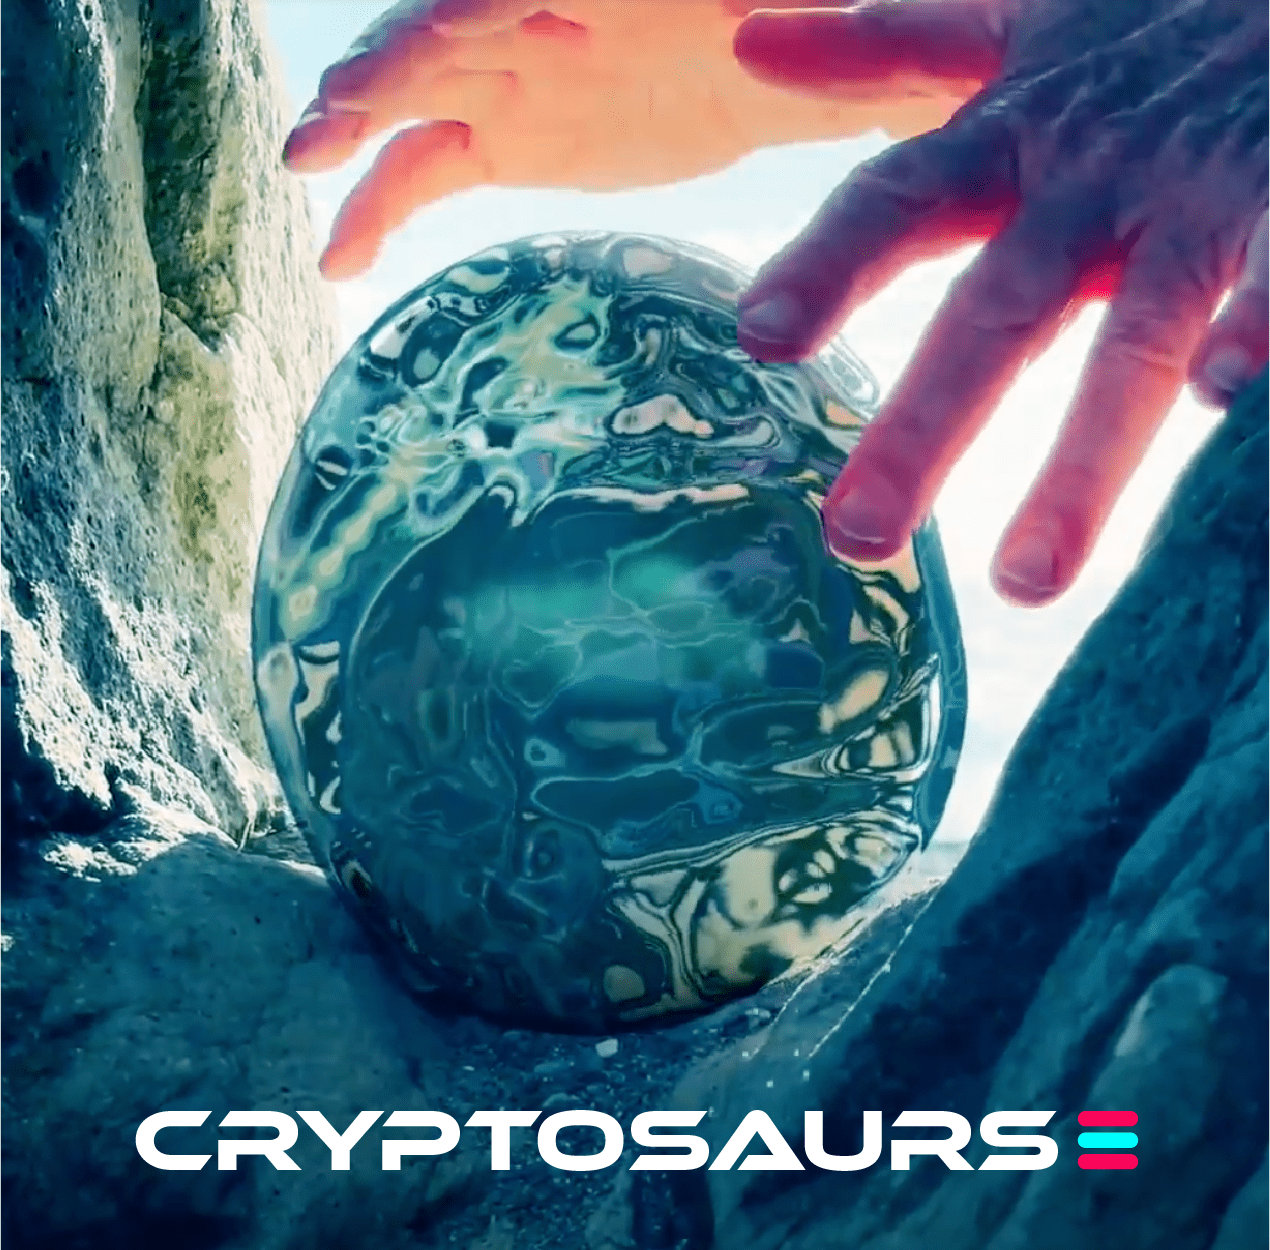 Cryptosaurs’ First NFT Drop and Your Chance to Self-Mint!